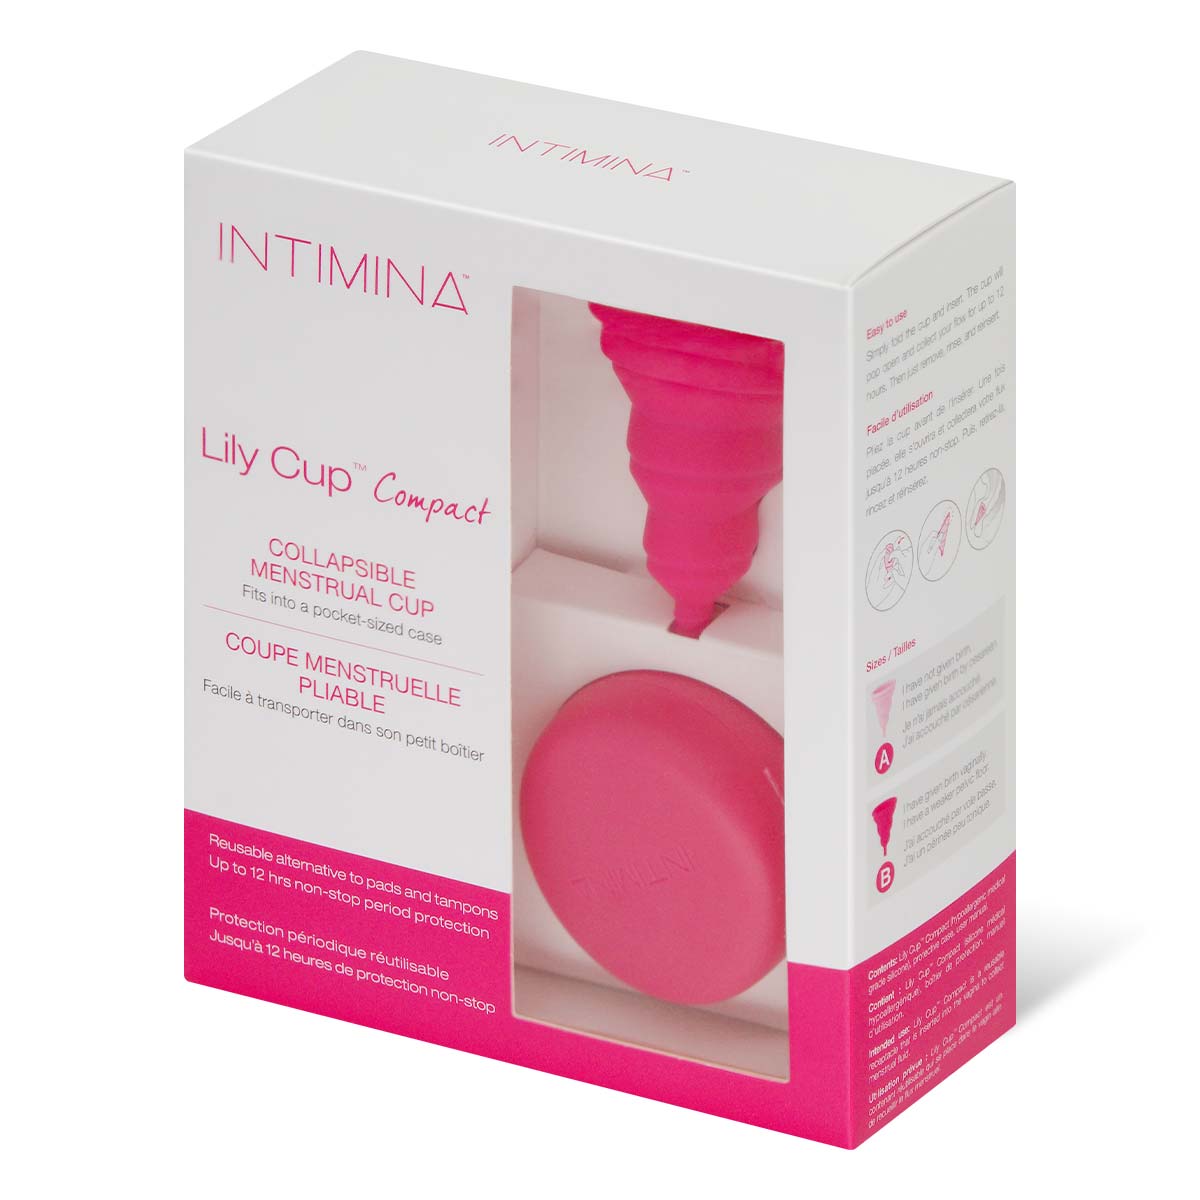 Intimina Lily Cup Compact Collapsible Menstrual Cup (Size B)-p_1